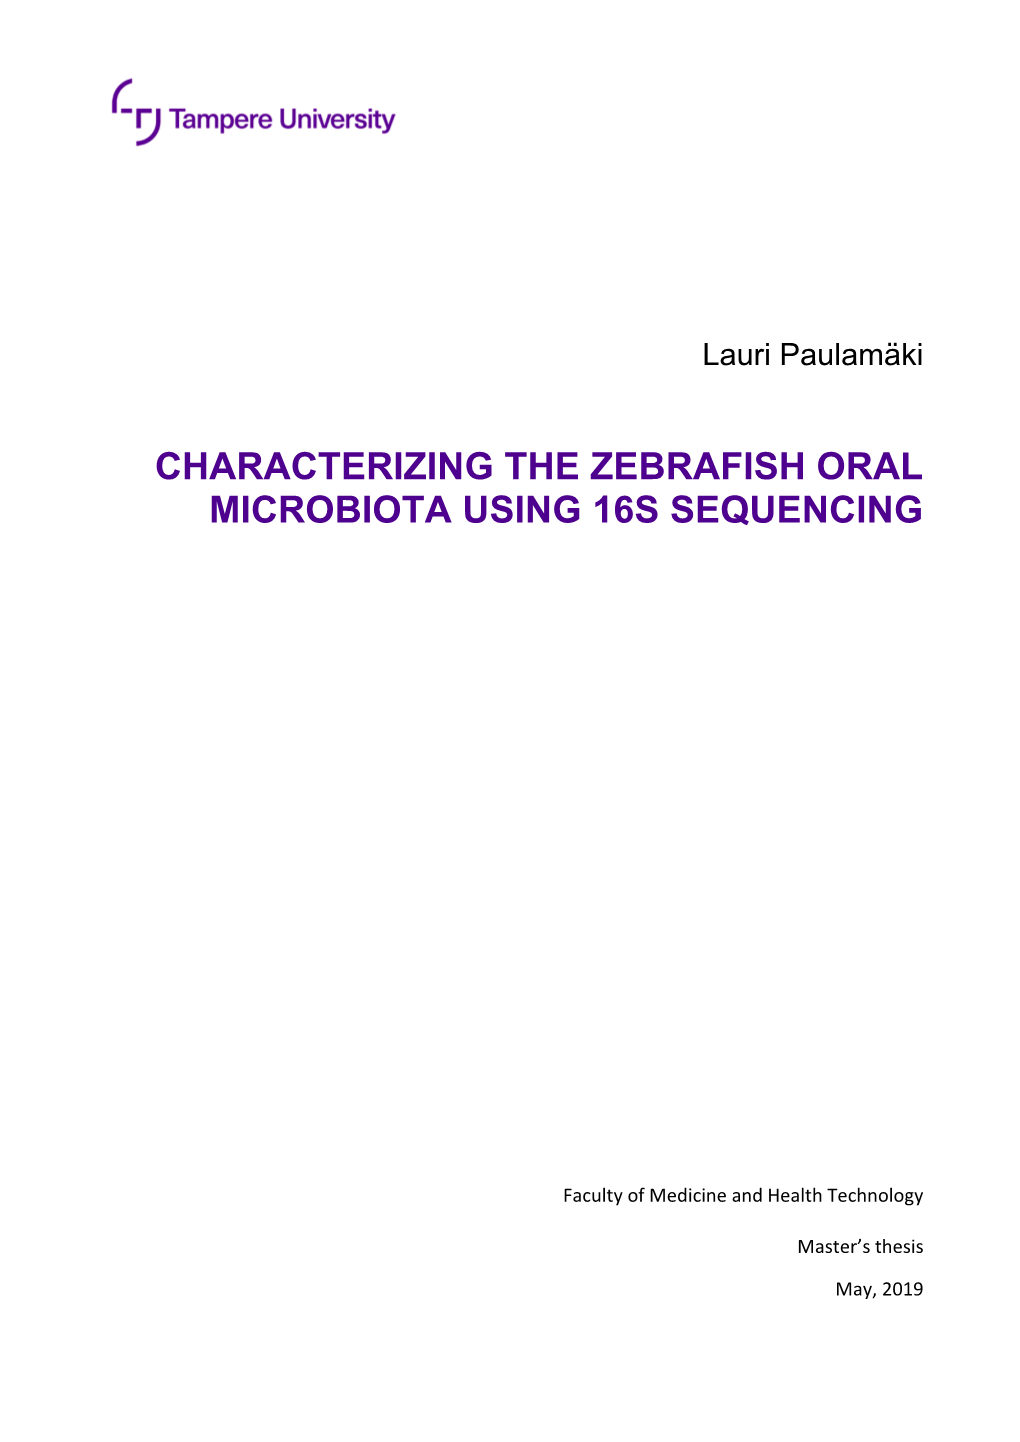 Characterizing the Zebrafish Oral Microbiota Using 16S Sequencing